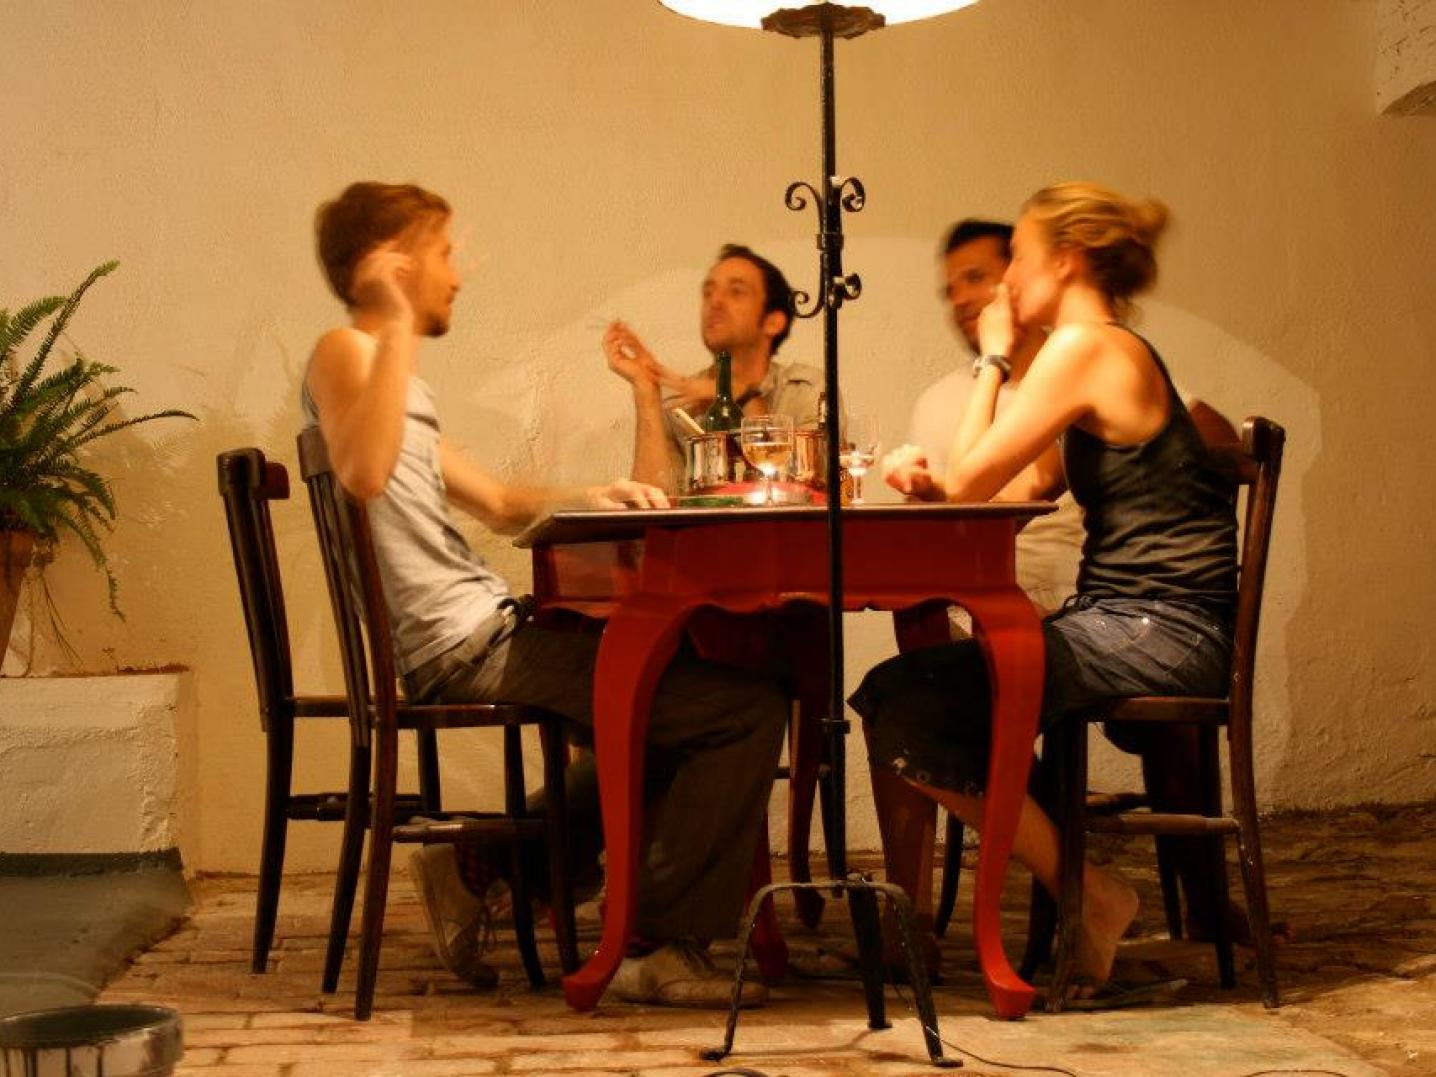 Four people sitting at a table having dinner at night